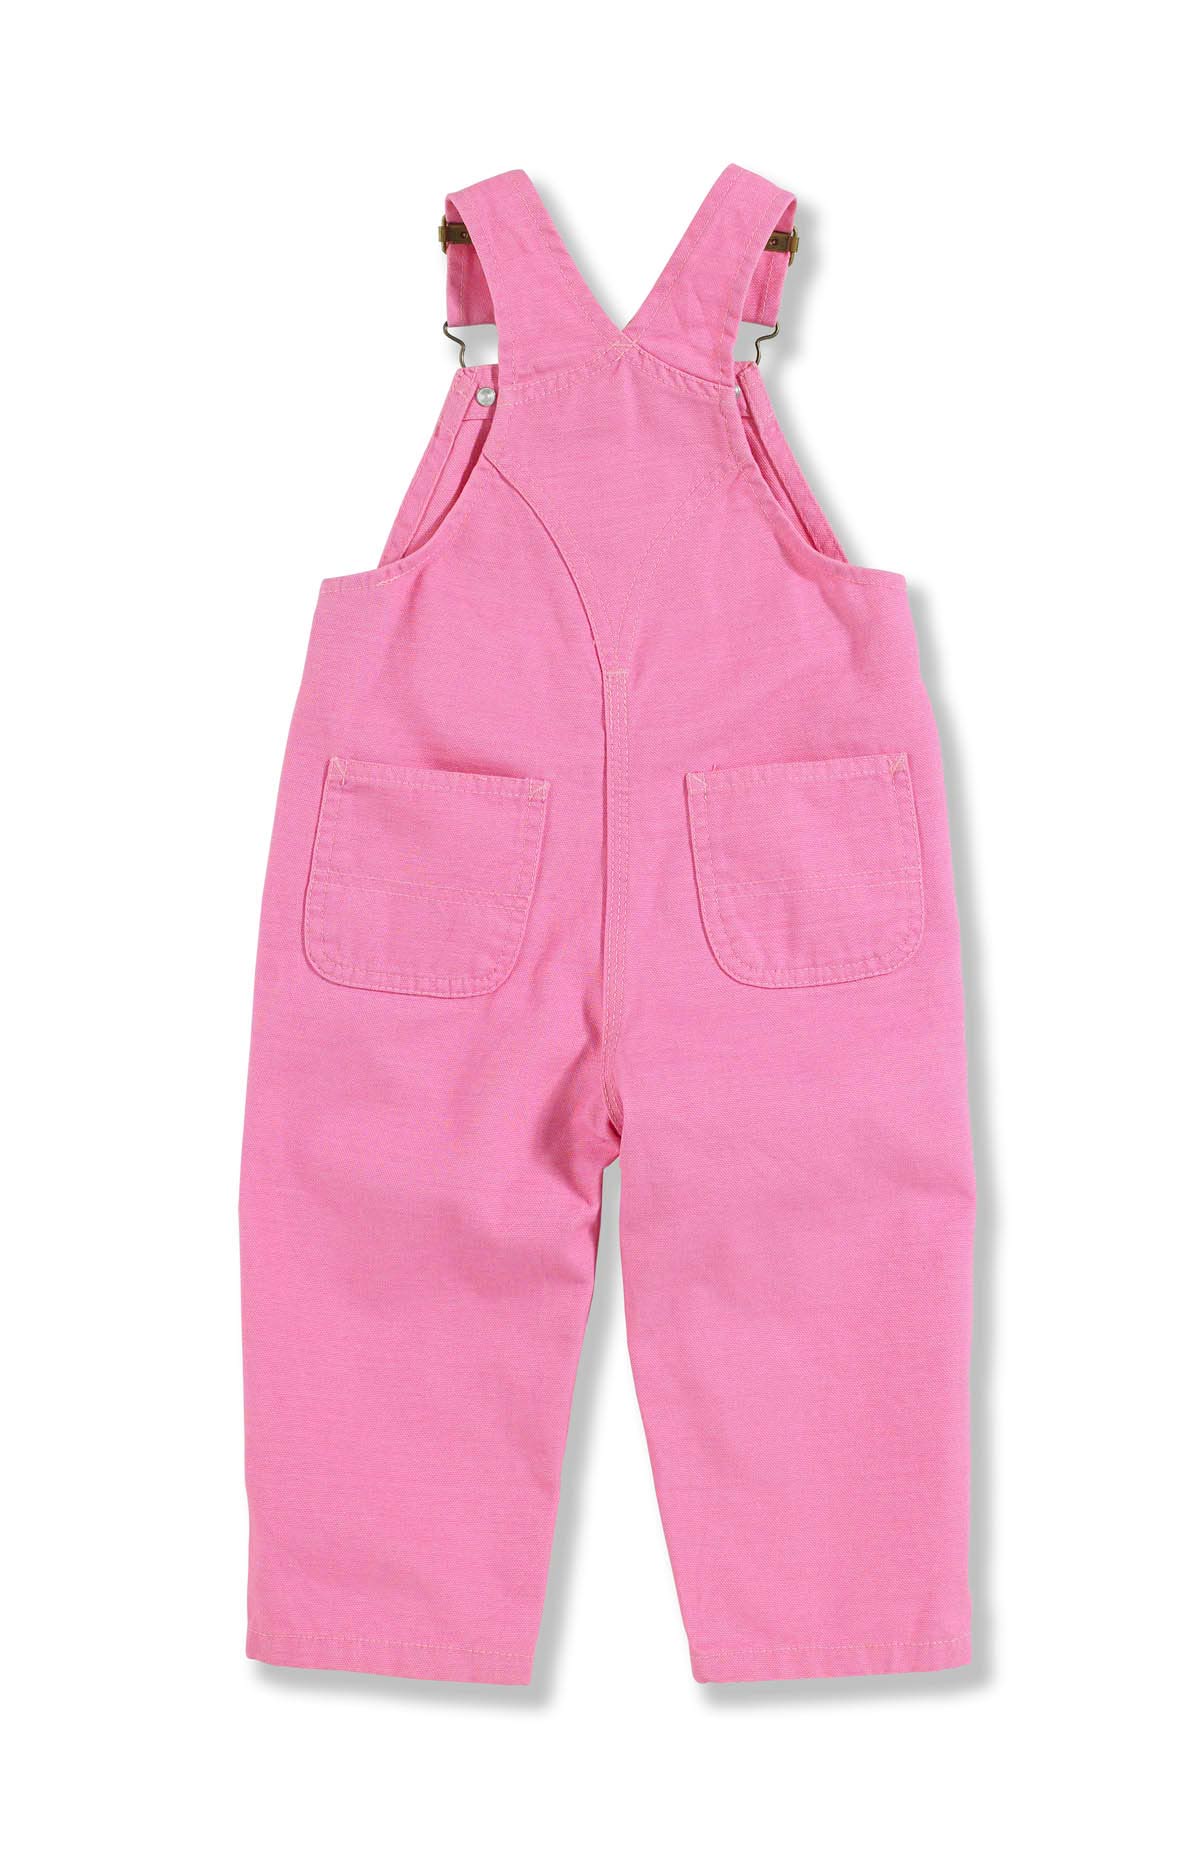 Carhartt Infant Girls Washed Microsanded Canvas Bib Overall